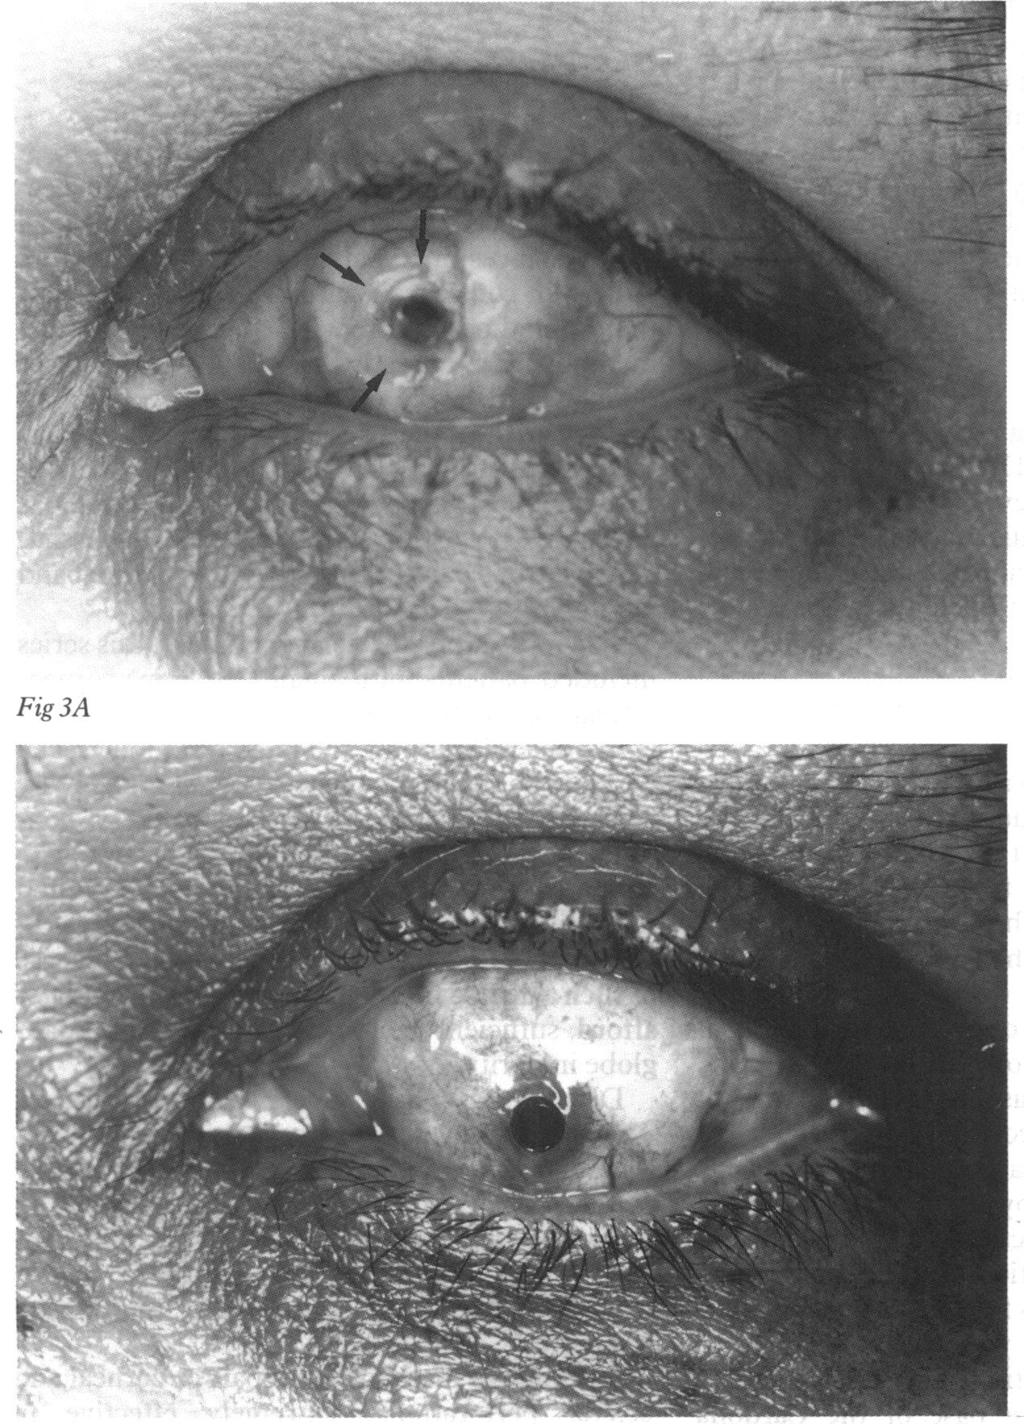 CASE 3 Following multiple retinal detachment operations, a 68-year-old female developed an enlarging equatorial staphyloma in the left eye which extended anteriorly from the corneal limbus from the